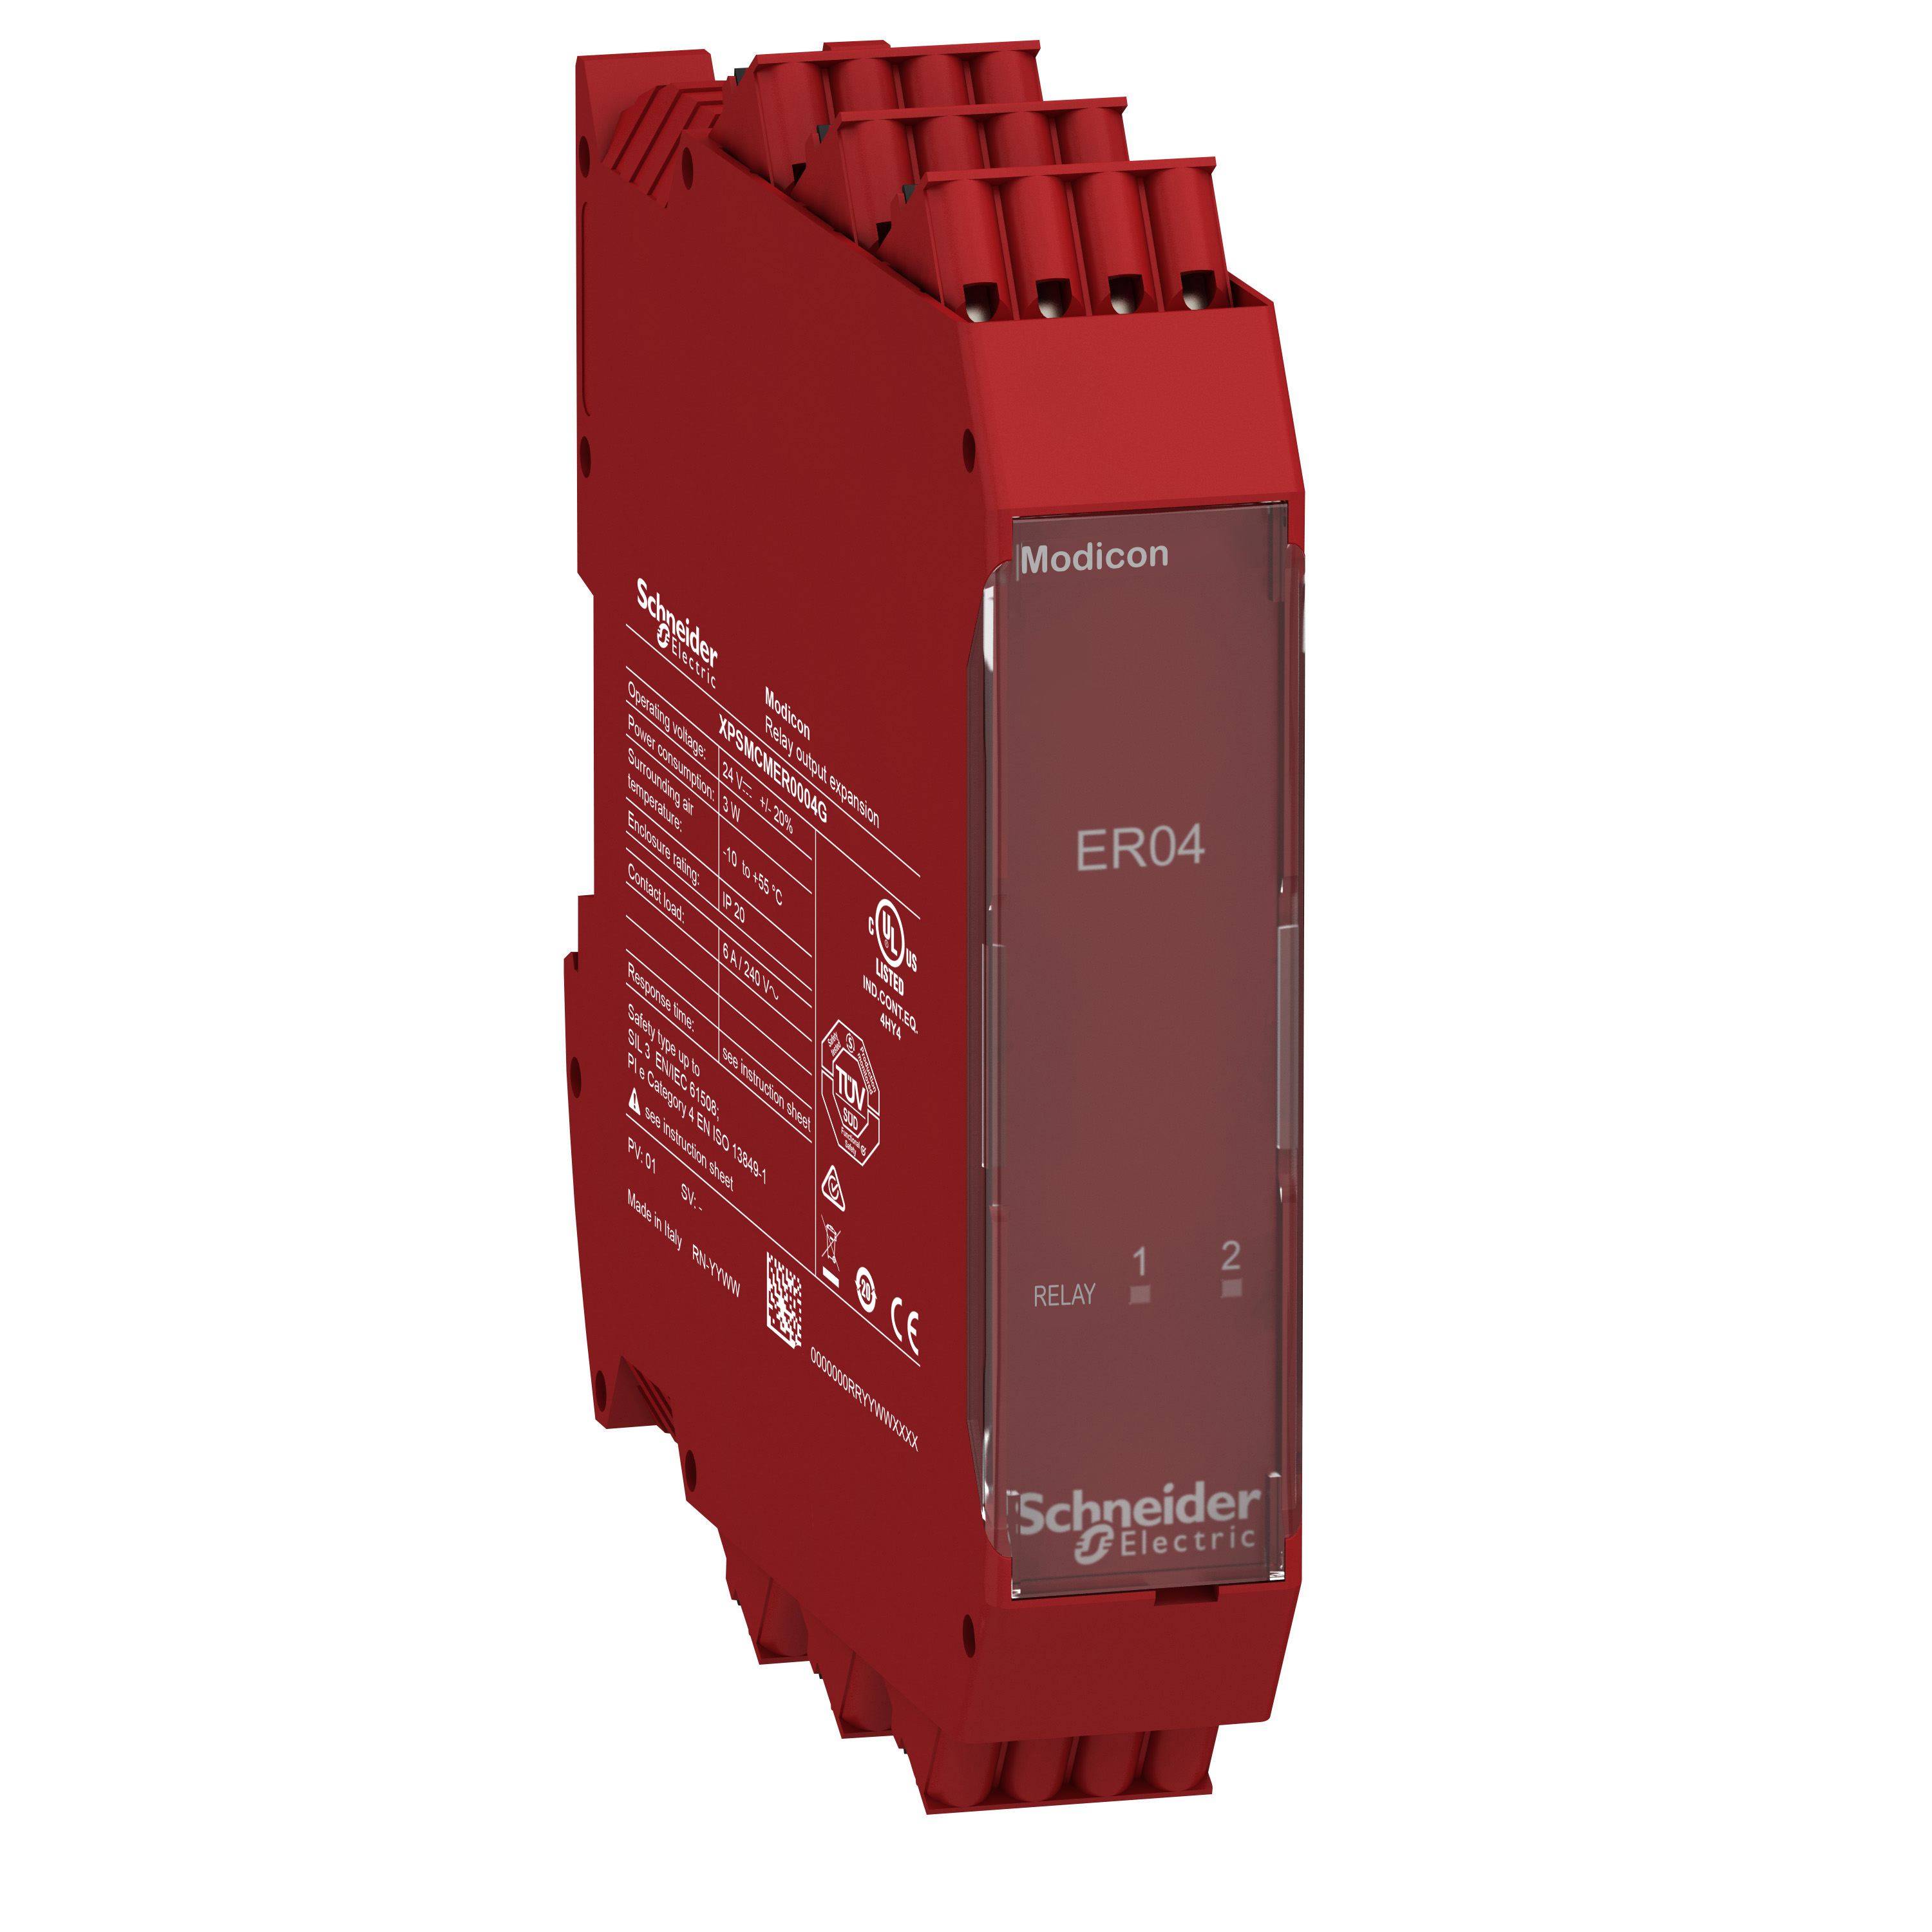 4 safety relay outputs expansion module with spring term